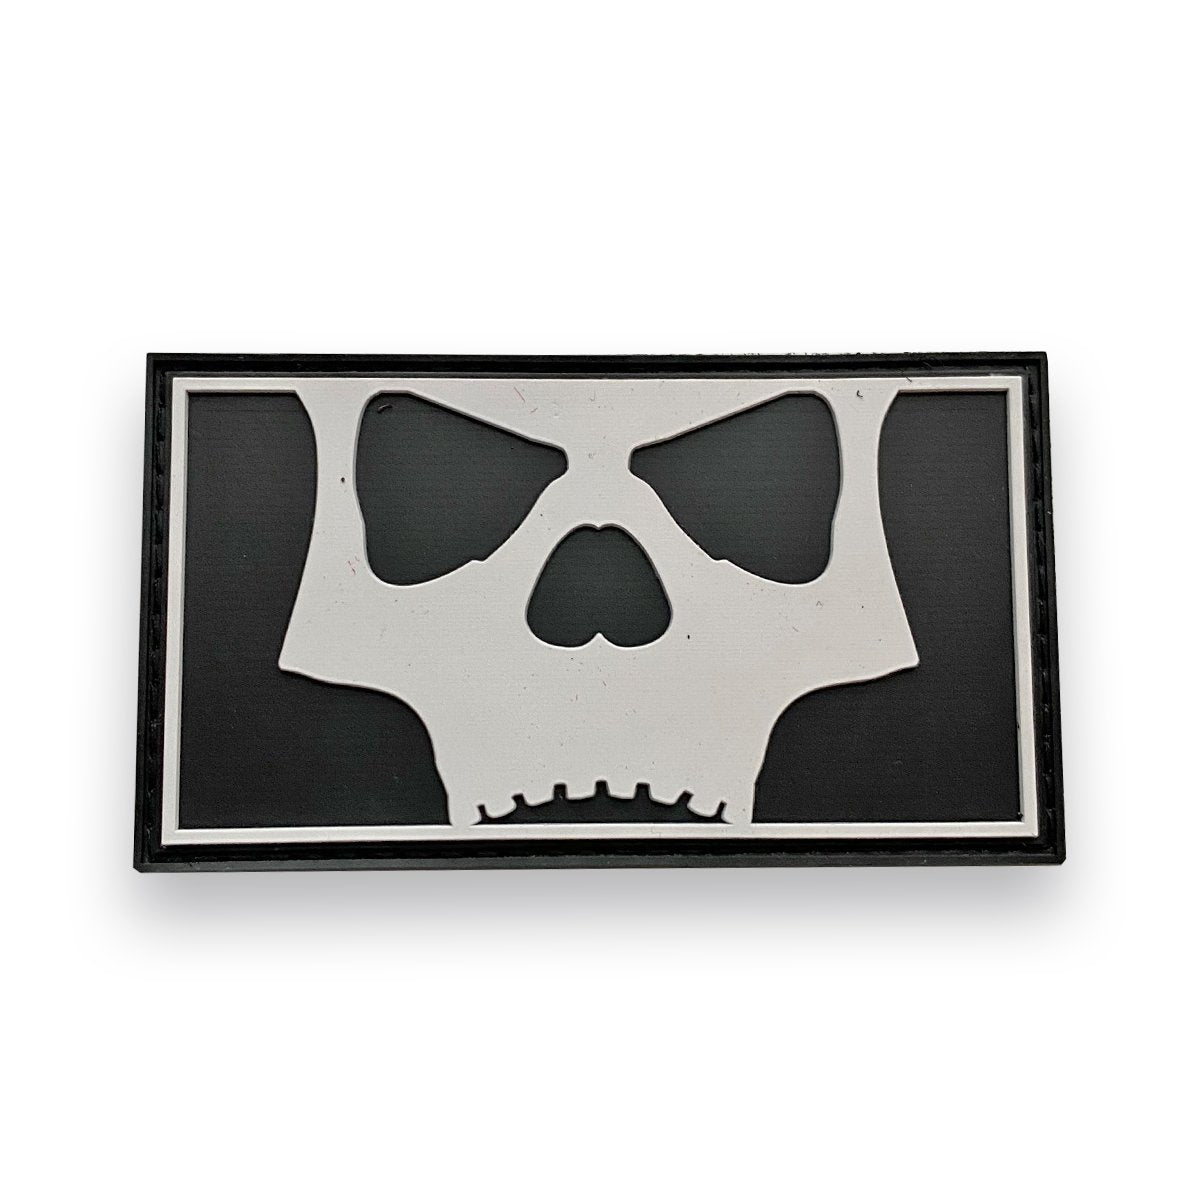 Infamous Paintball "Icon Skull" Full Style Patch - Black White